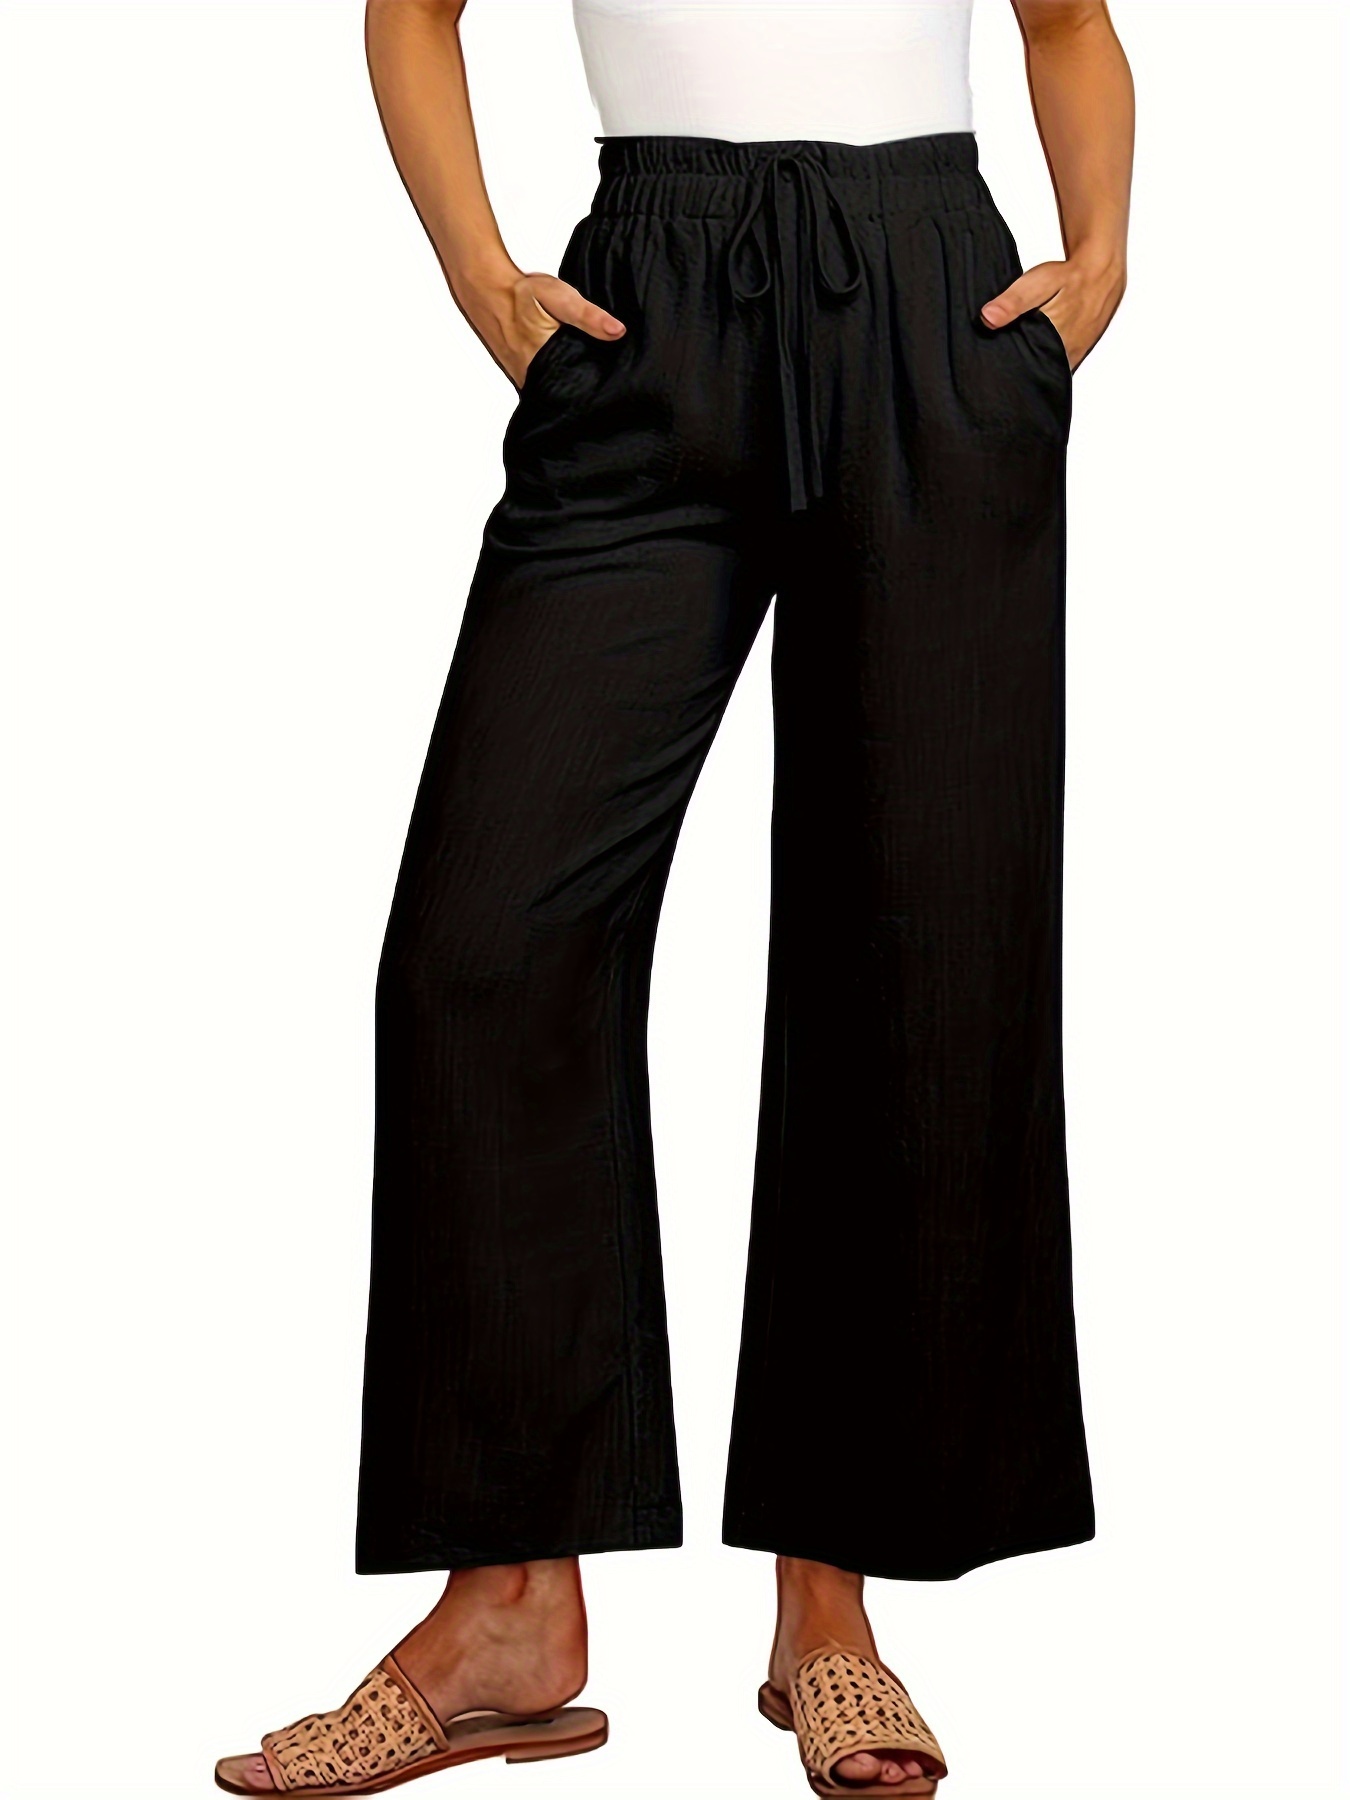 Women Loose Fitting Linen Pants Elastic High Palazzo Trousers for